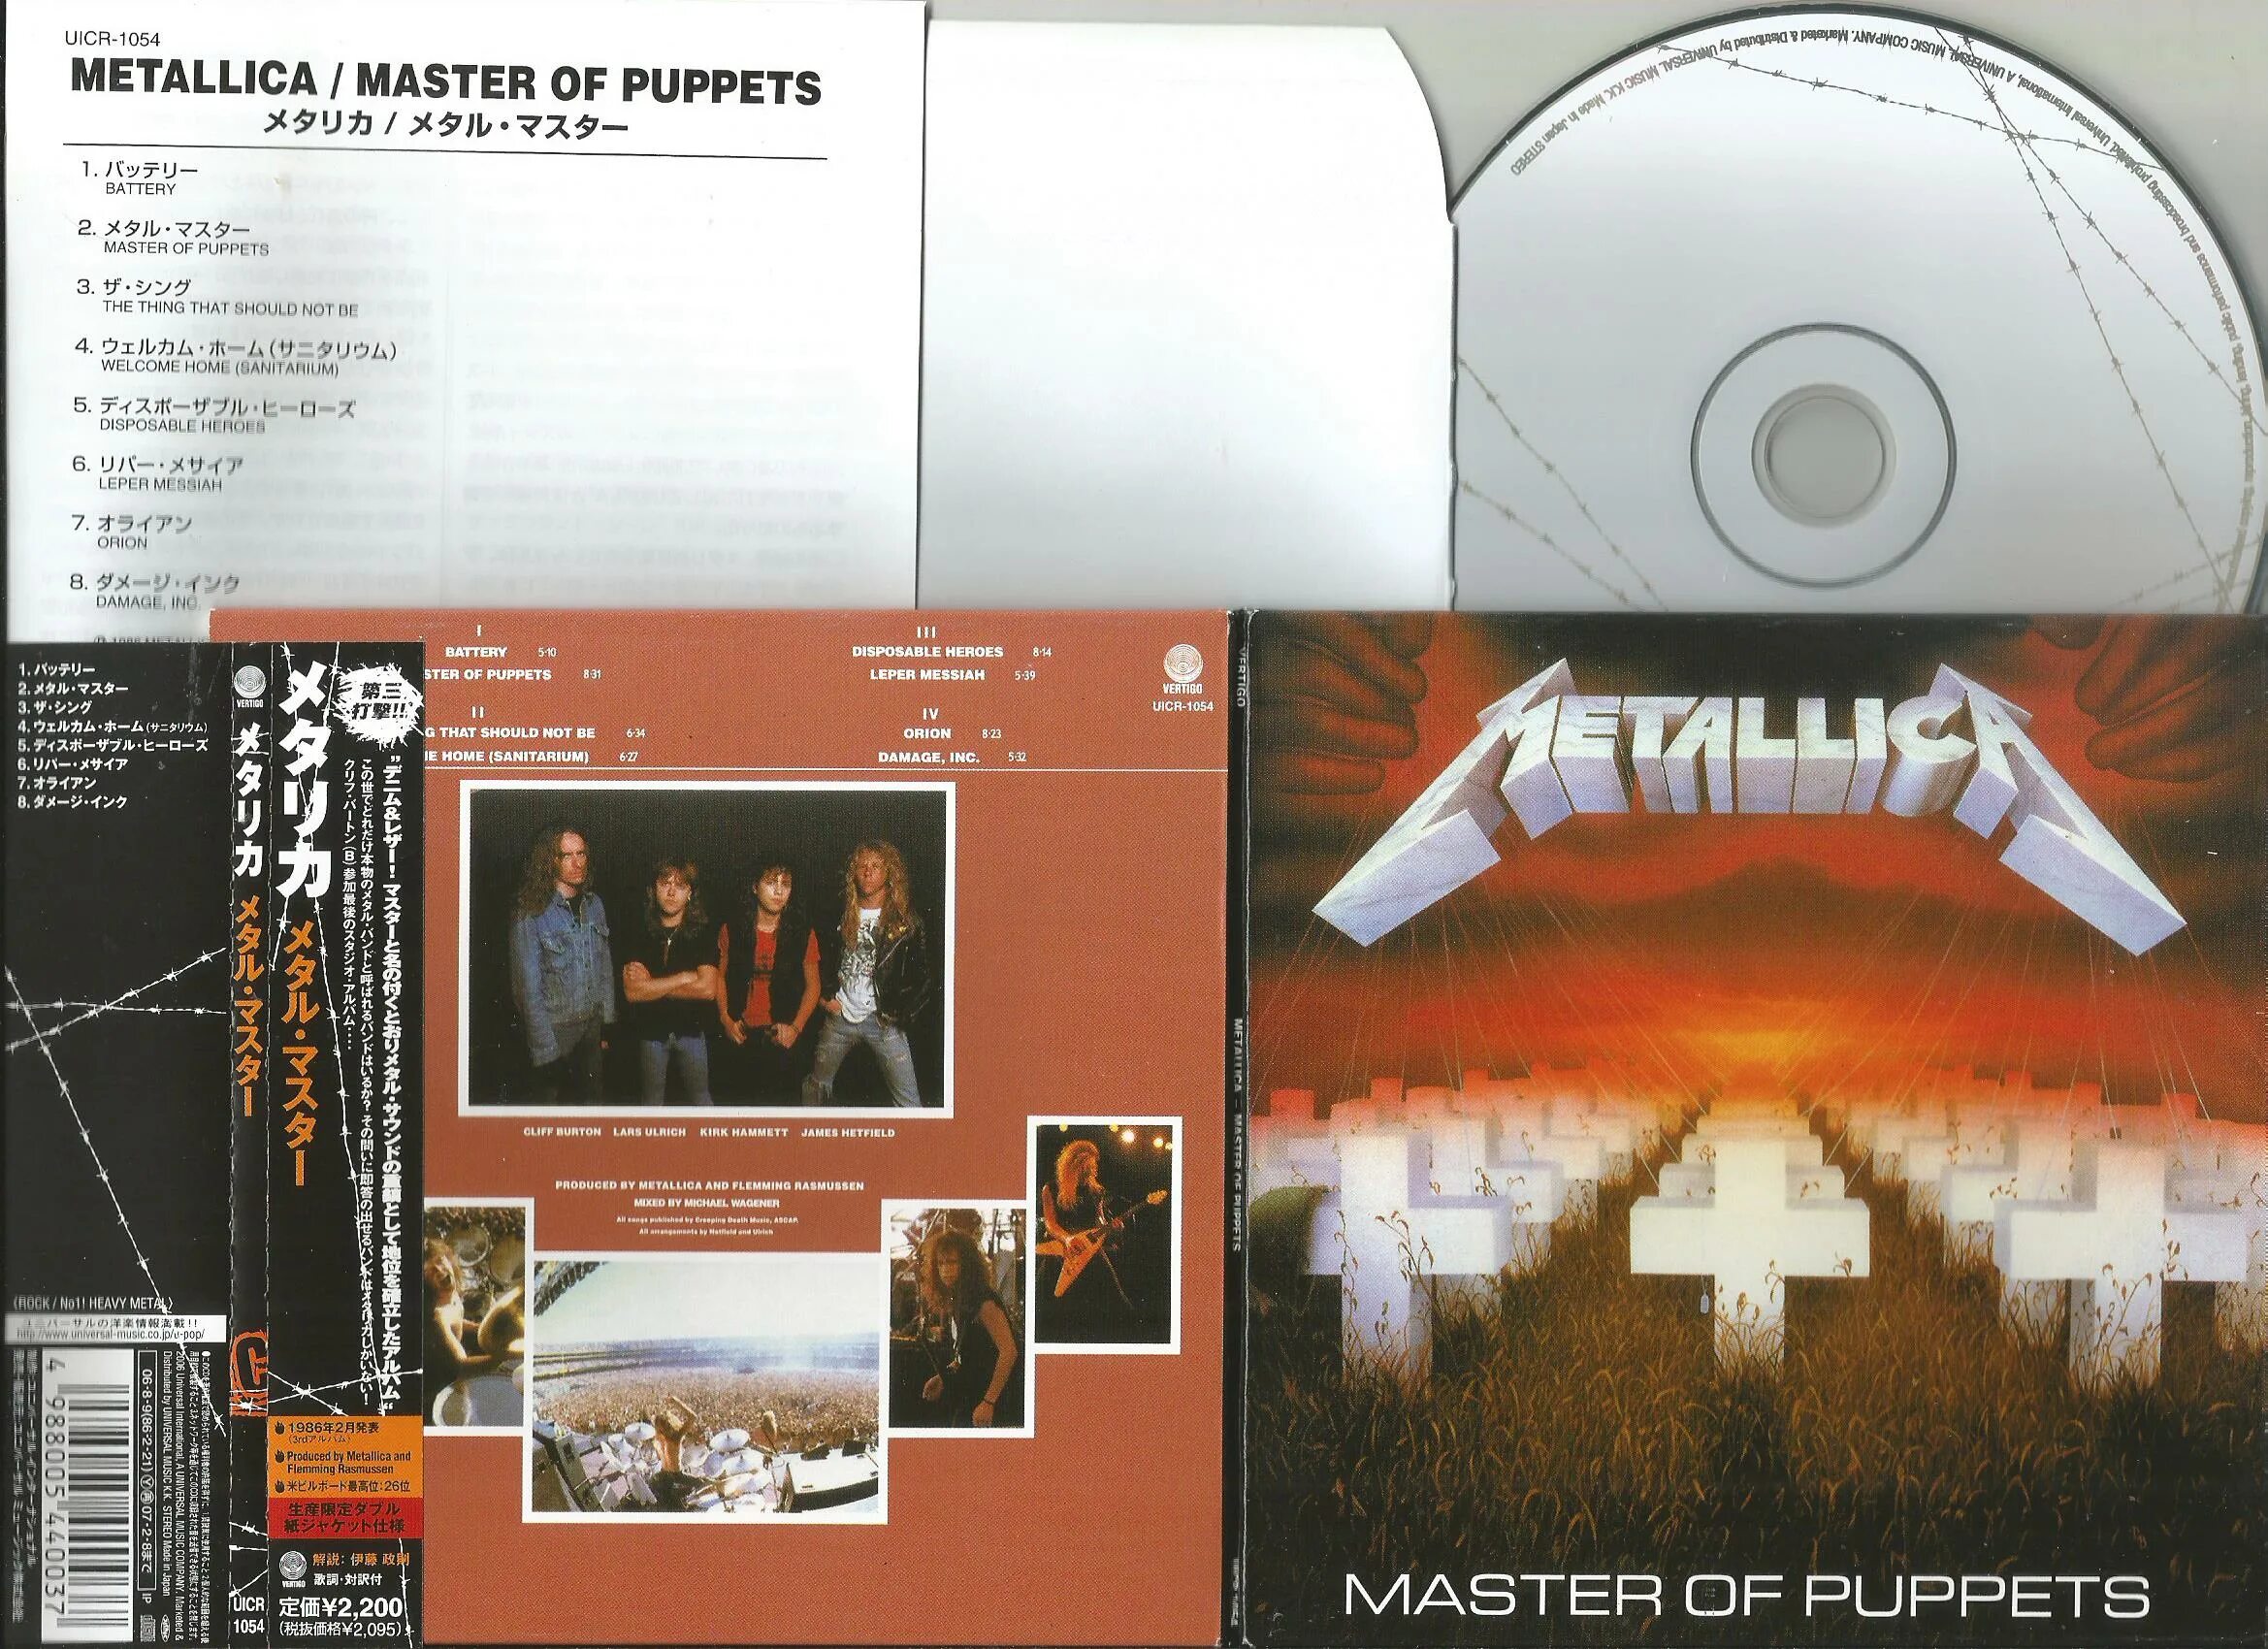 Master of puppets текст. Metallica (1986) - Master of Puppets [LP]. Metallica Master of Puppets 1986 LP Vinyl. Metallica Master of Puppets винил. Metallica пластинка Master of Puppets.